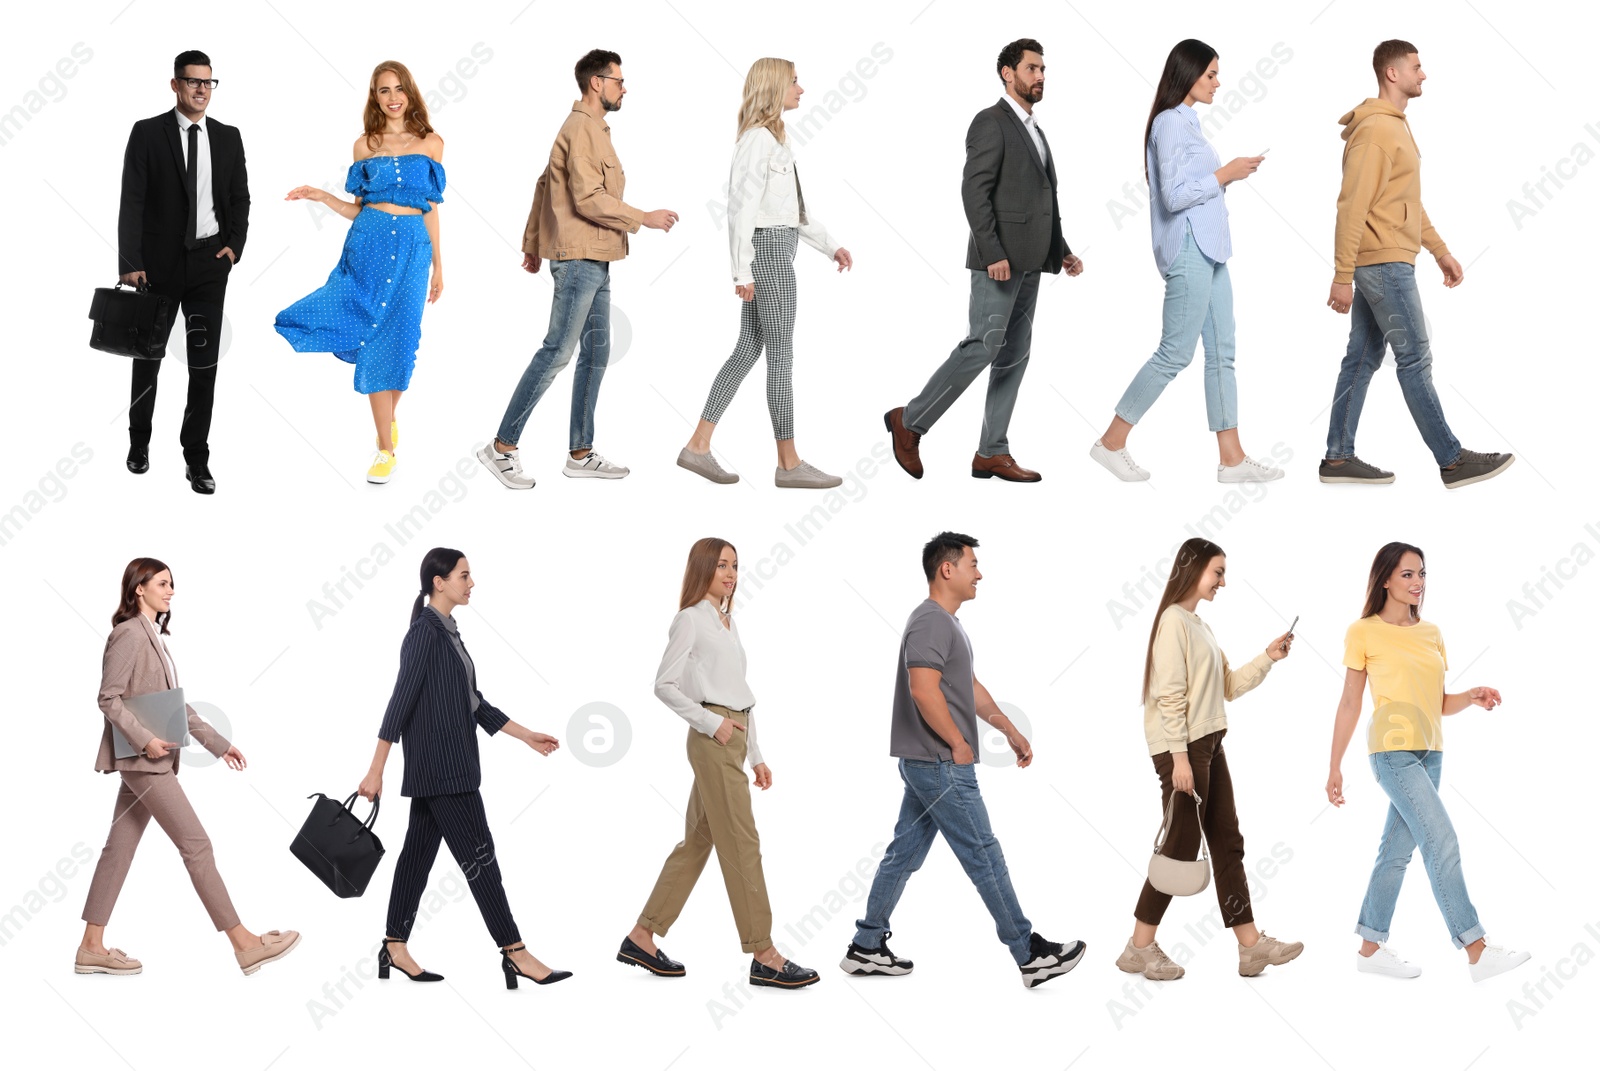 Image of Collage with photos of people wearing stylish outfit walking on white background